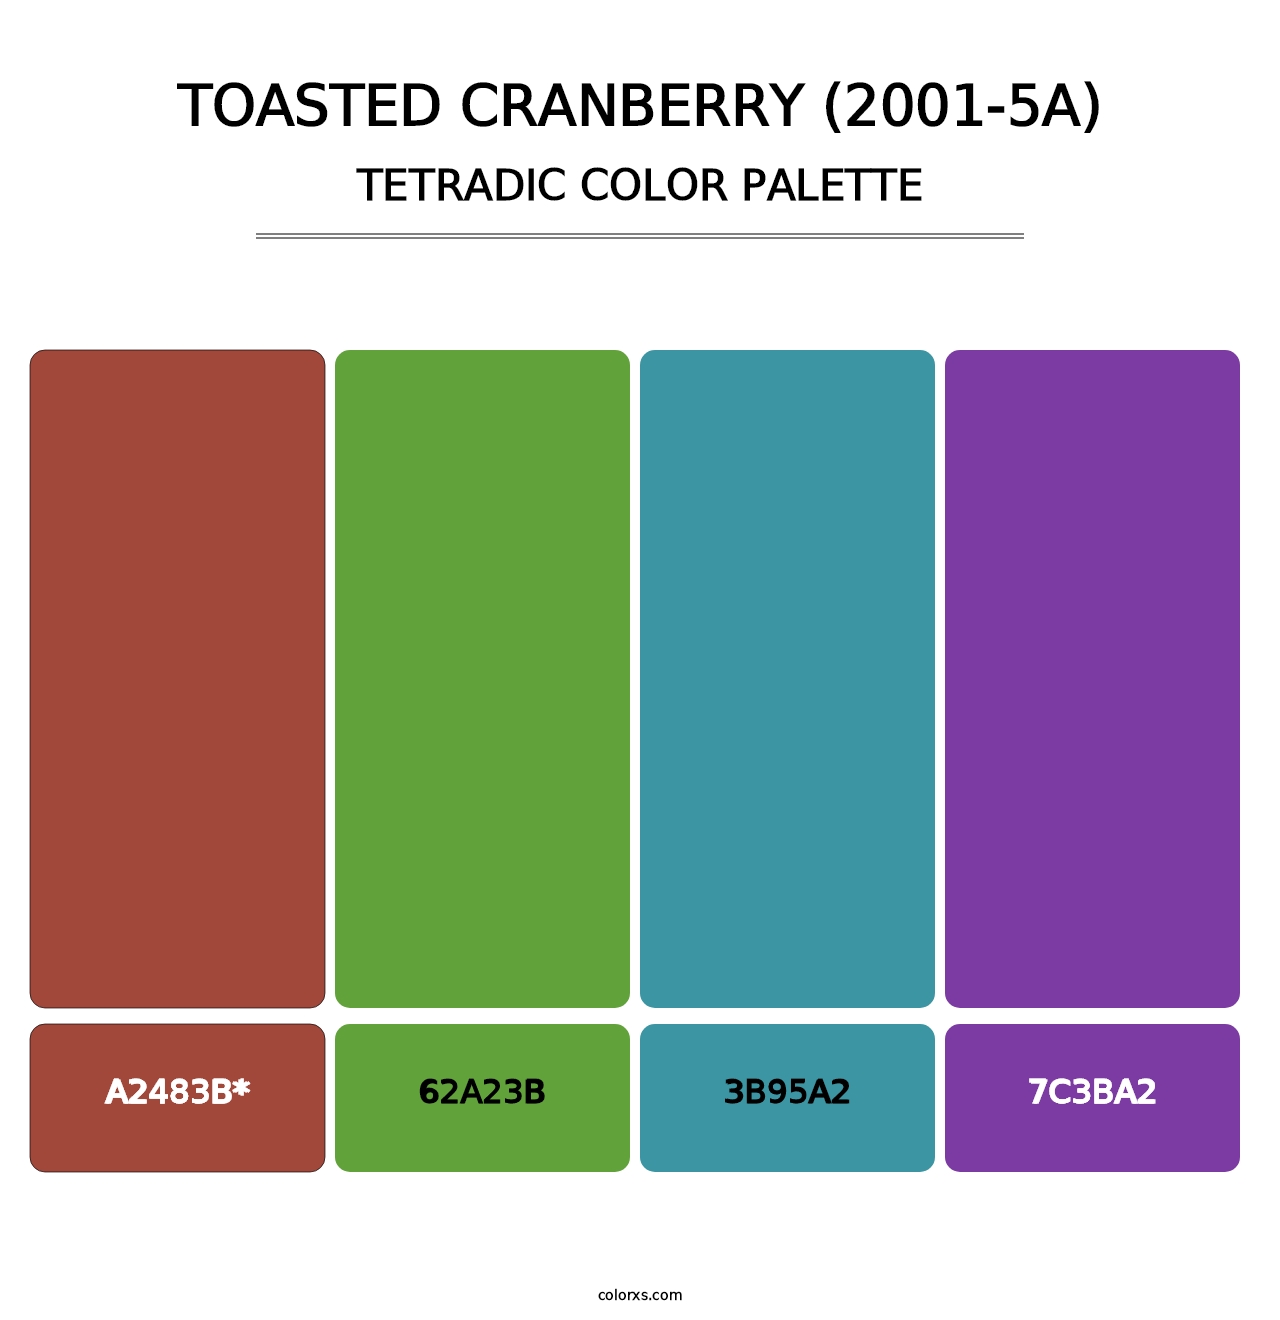 Toasted Cranberry (2001-5A) - Tetradic Color Palette